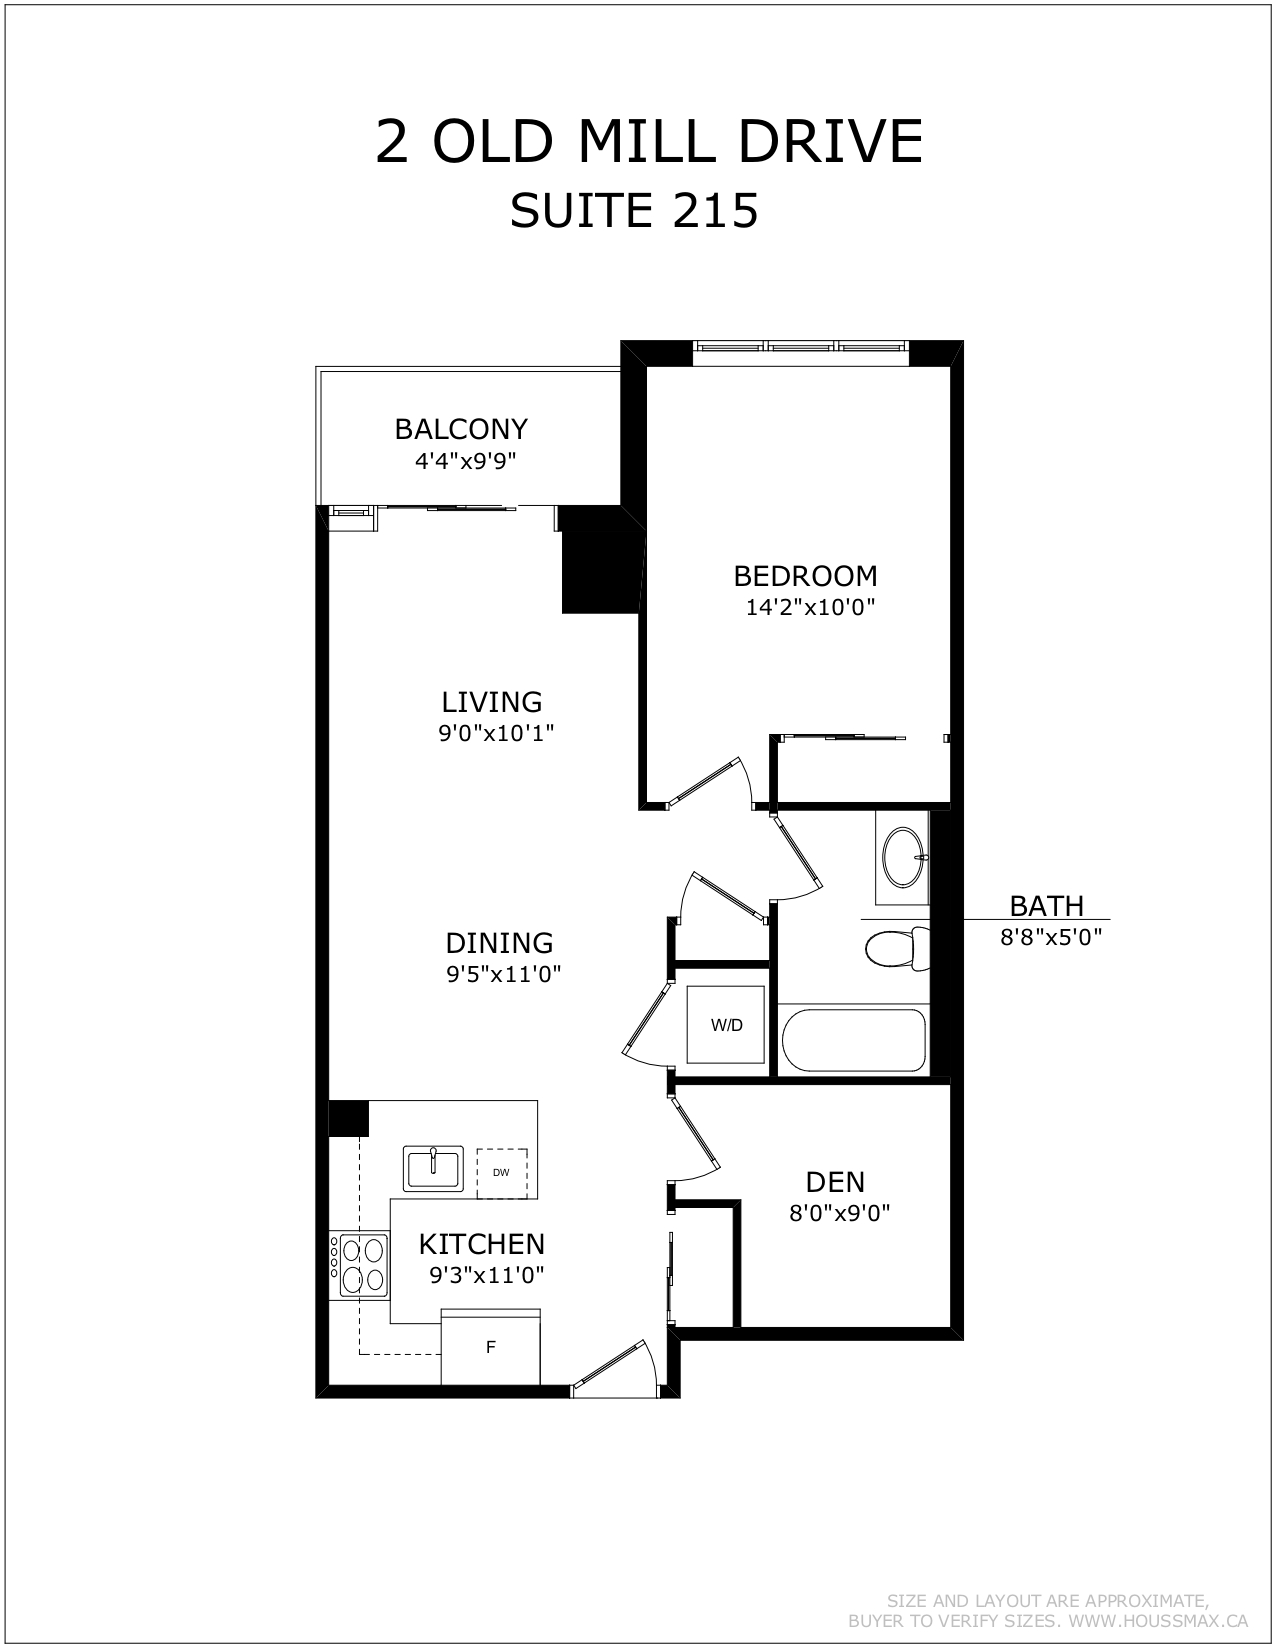 Floor plans for 2 Old Mill Dr Unit 215.